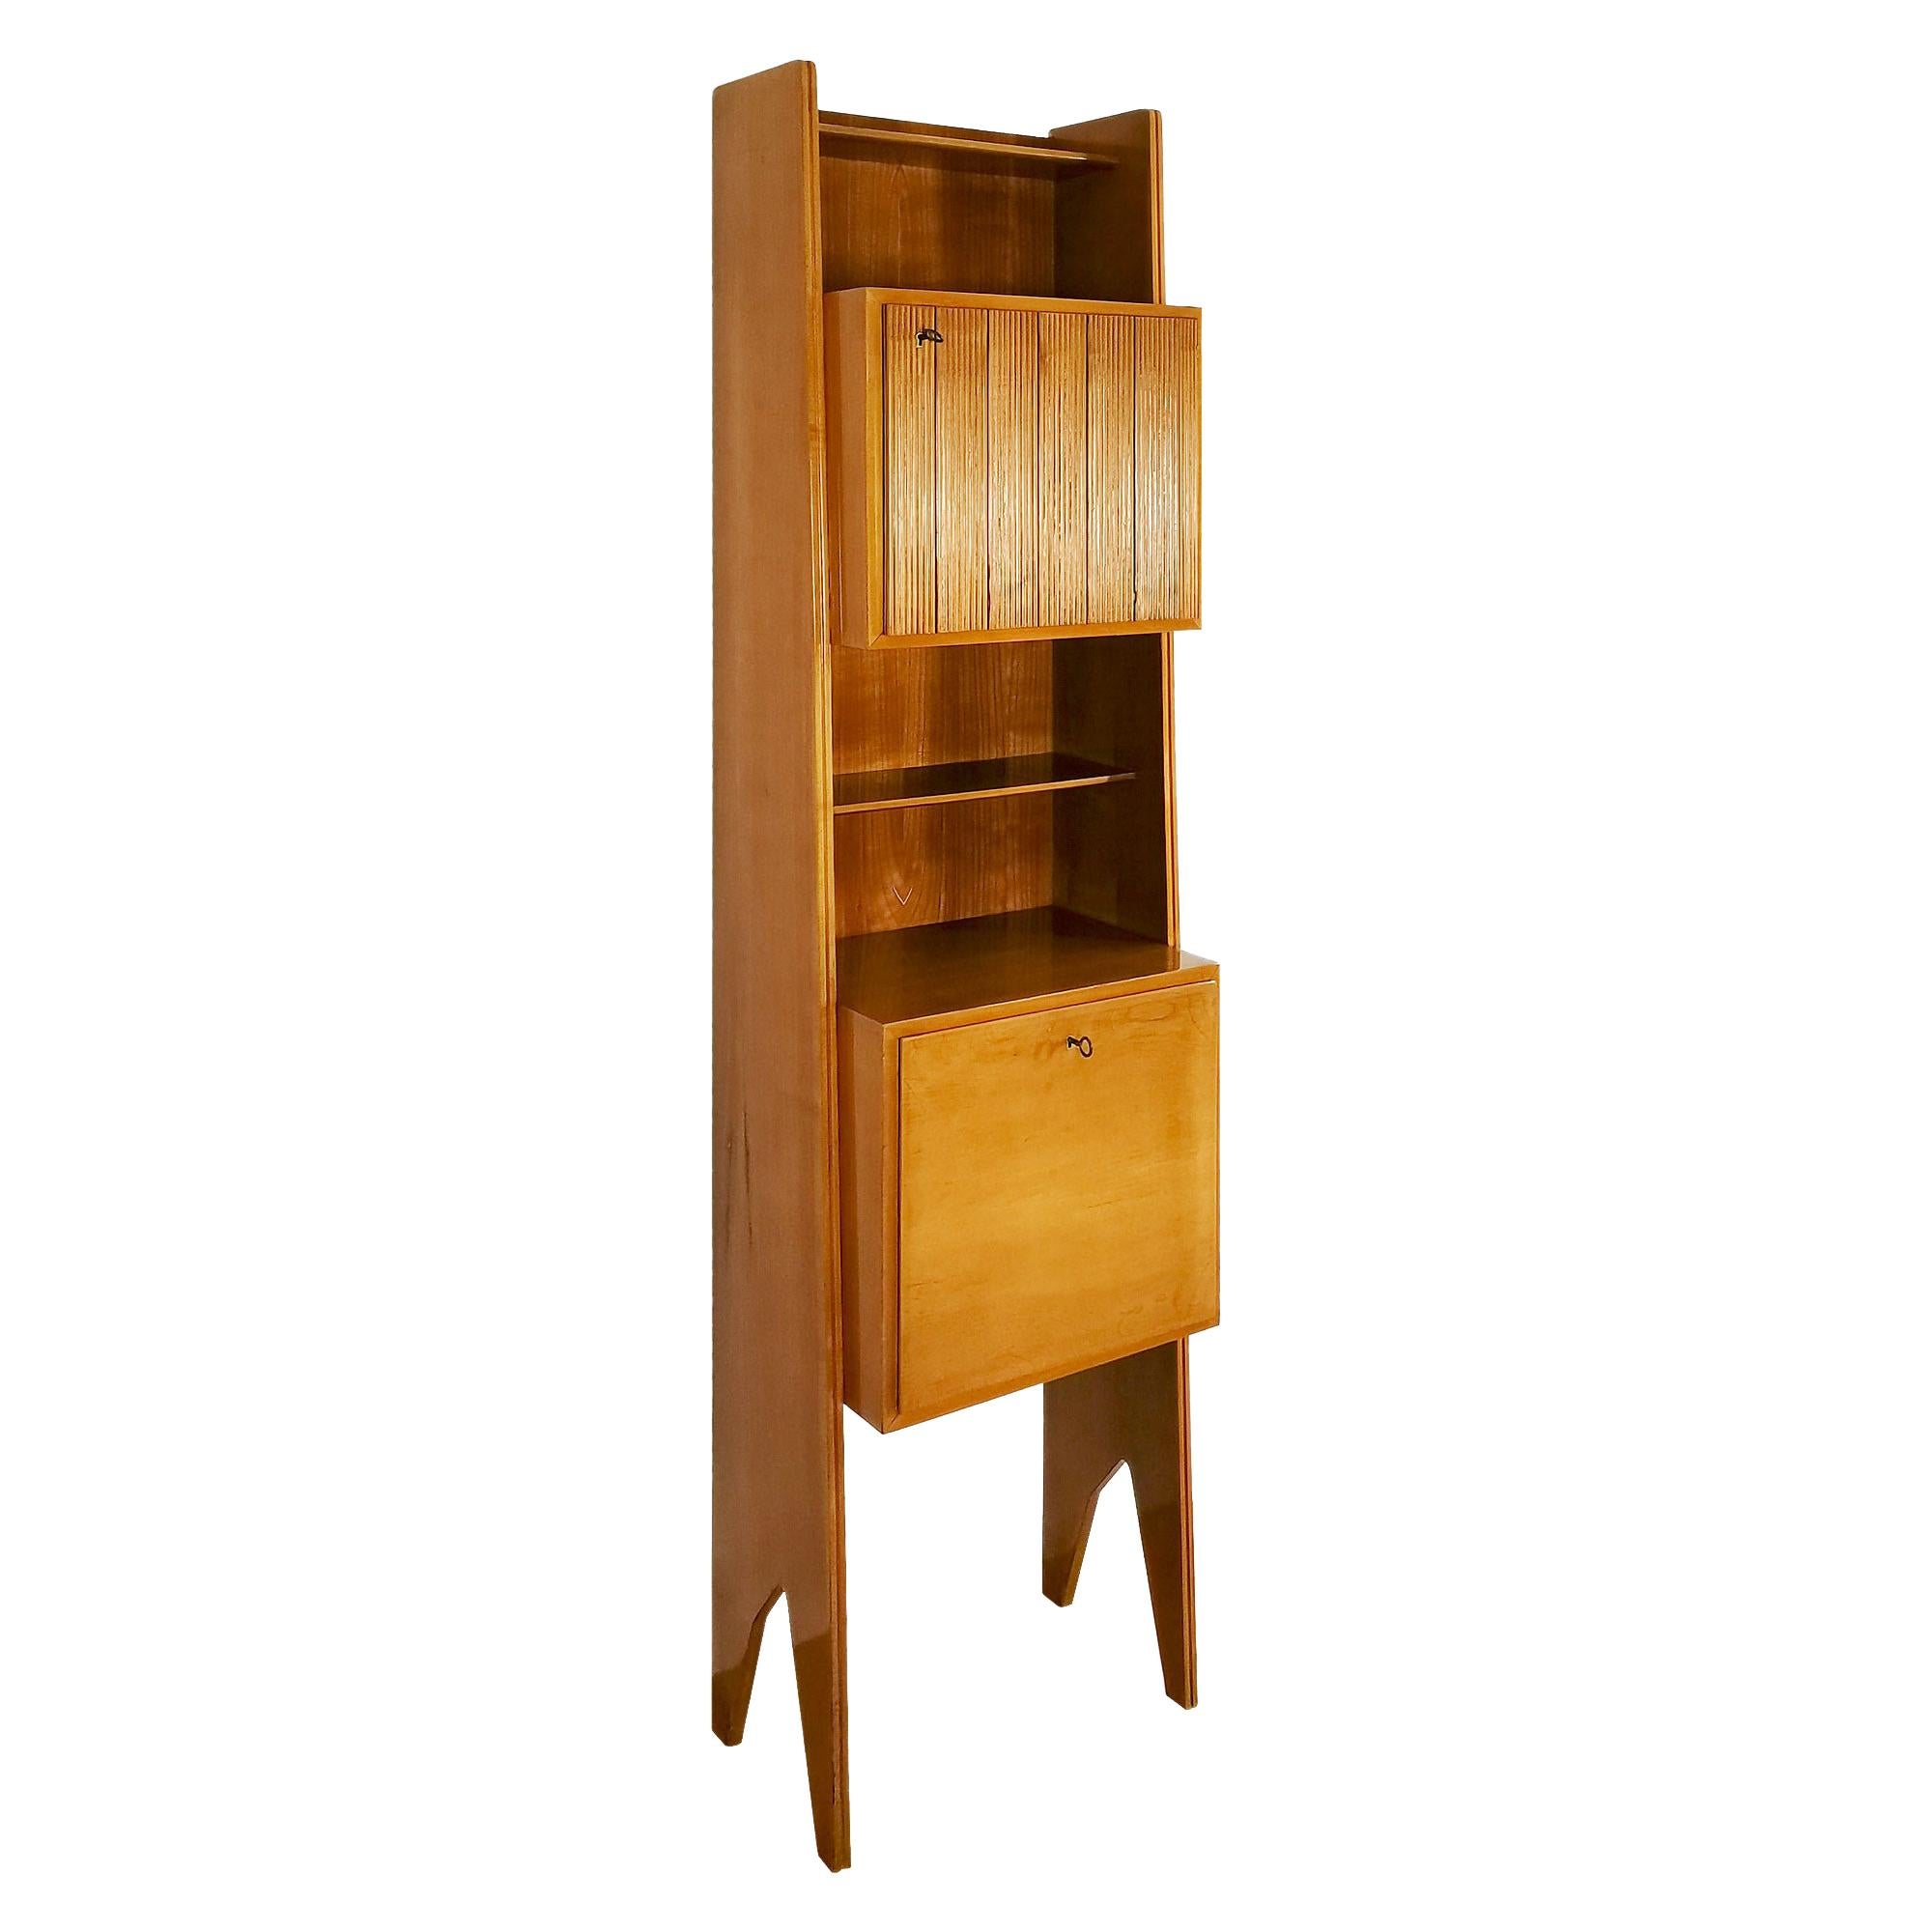 Mid-Century Modern Cherry Wood Bookcase With Shelves and Two Doors - Italy